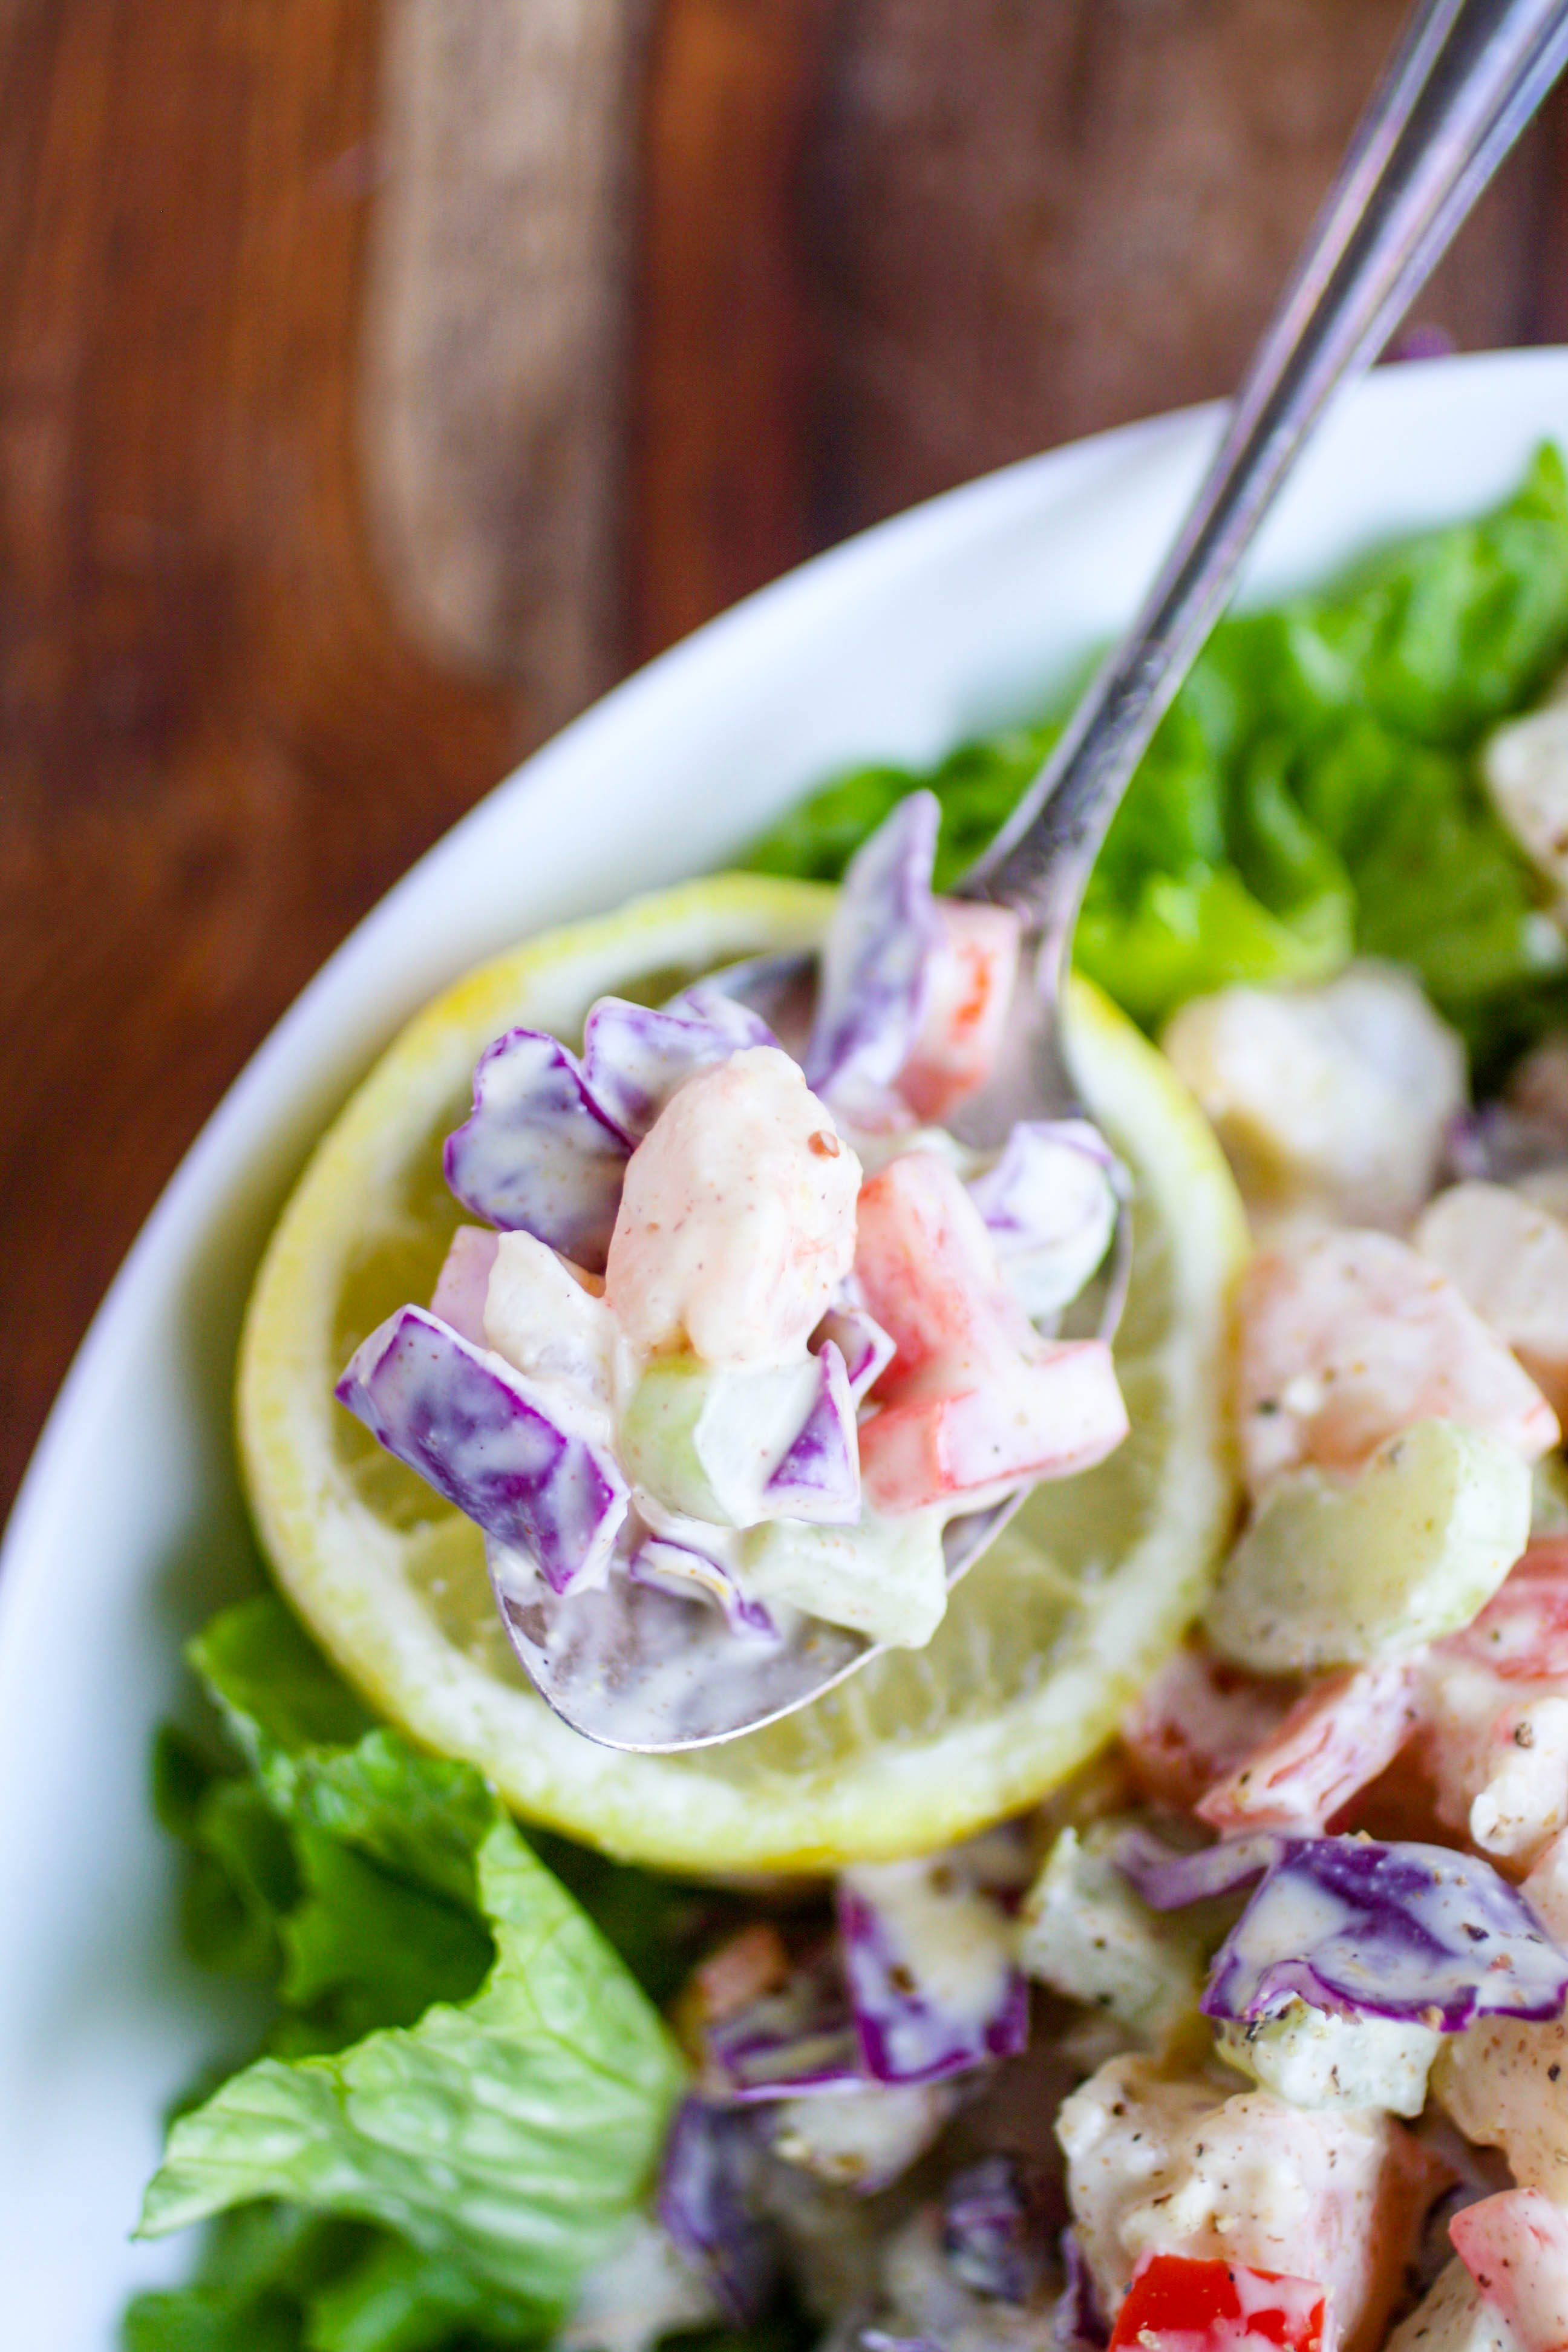 Chopped Shrimp Remoulade Salad is great on a sandwich, or with your favorite lettuce! Chopped Shrimp Remoulade Salad is a delight for any meal, any season!